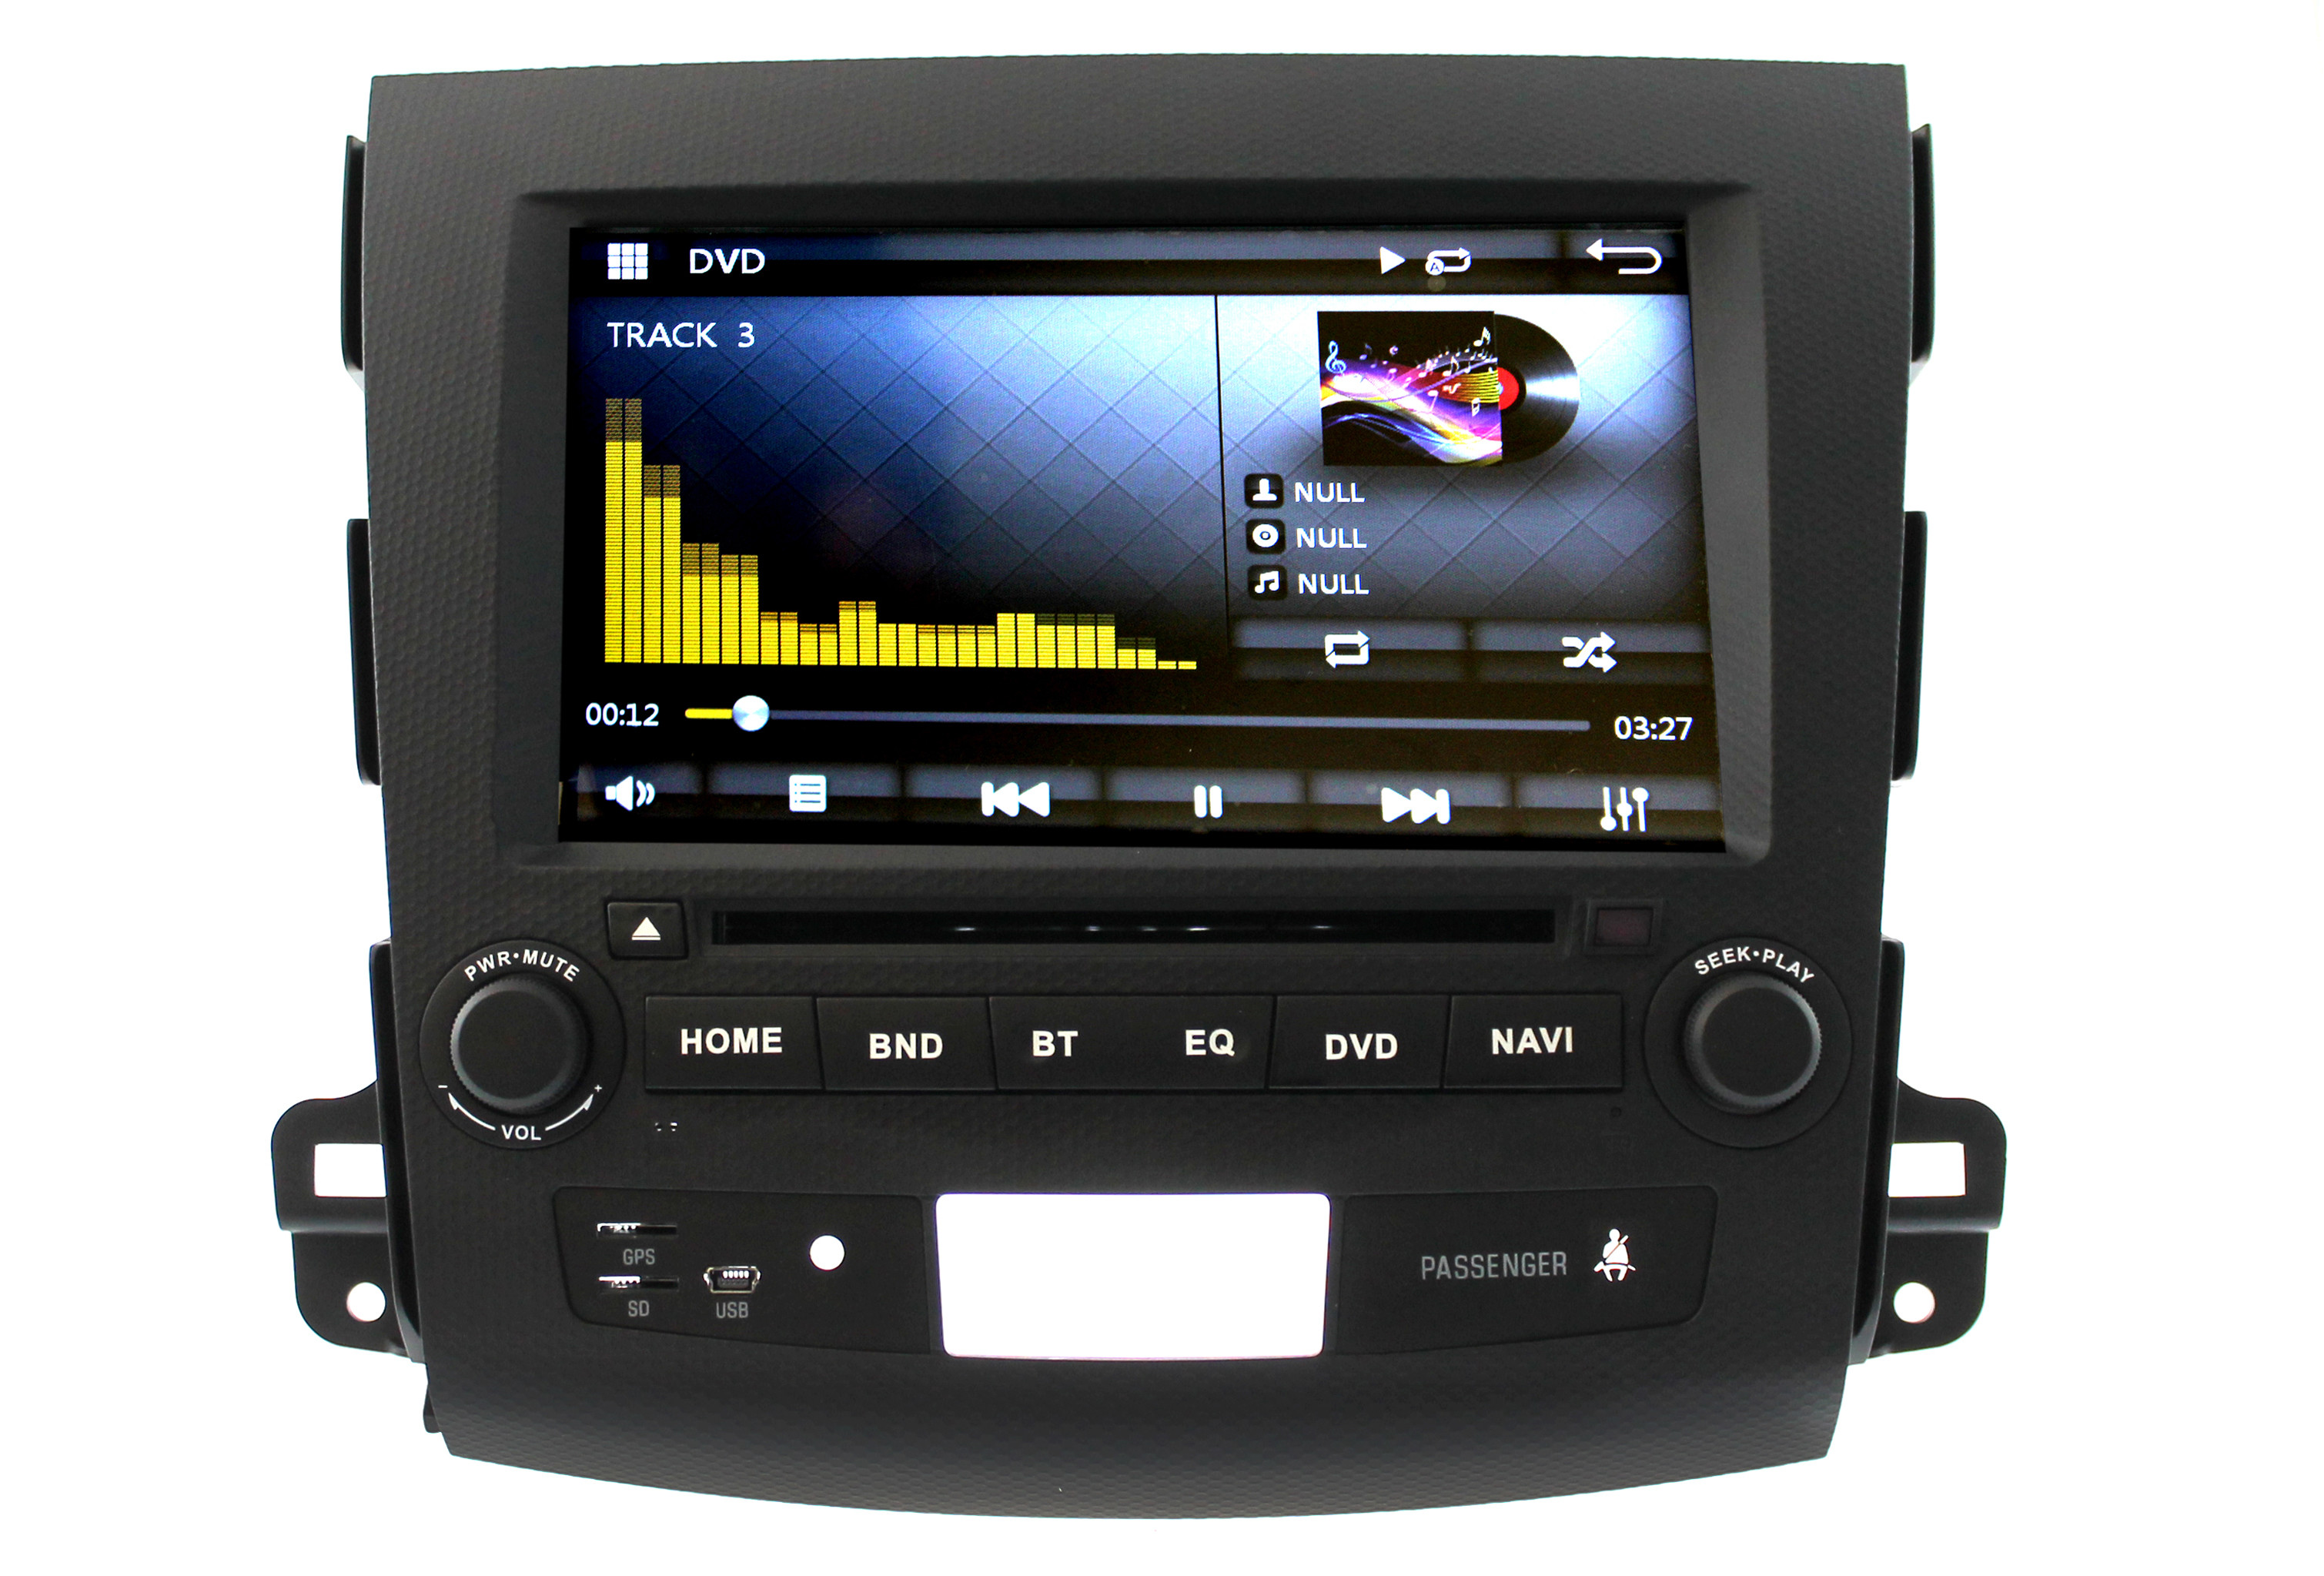 3019x2047 Mitsubishi Outlander (2005-2012) incl. vehicles with Rockford Fosgate  Systems! Now with optional Apple CarPlay and Android Auto (â¢)